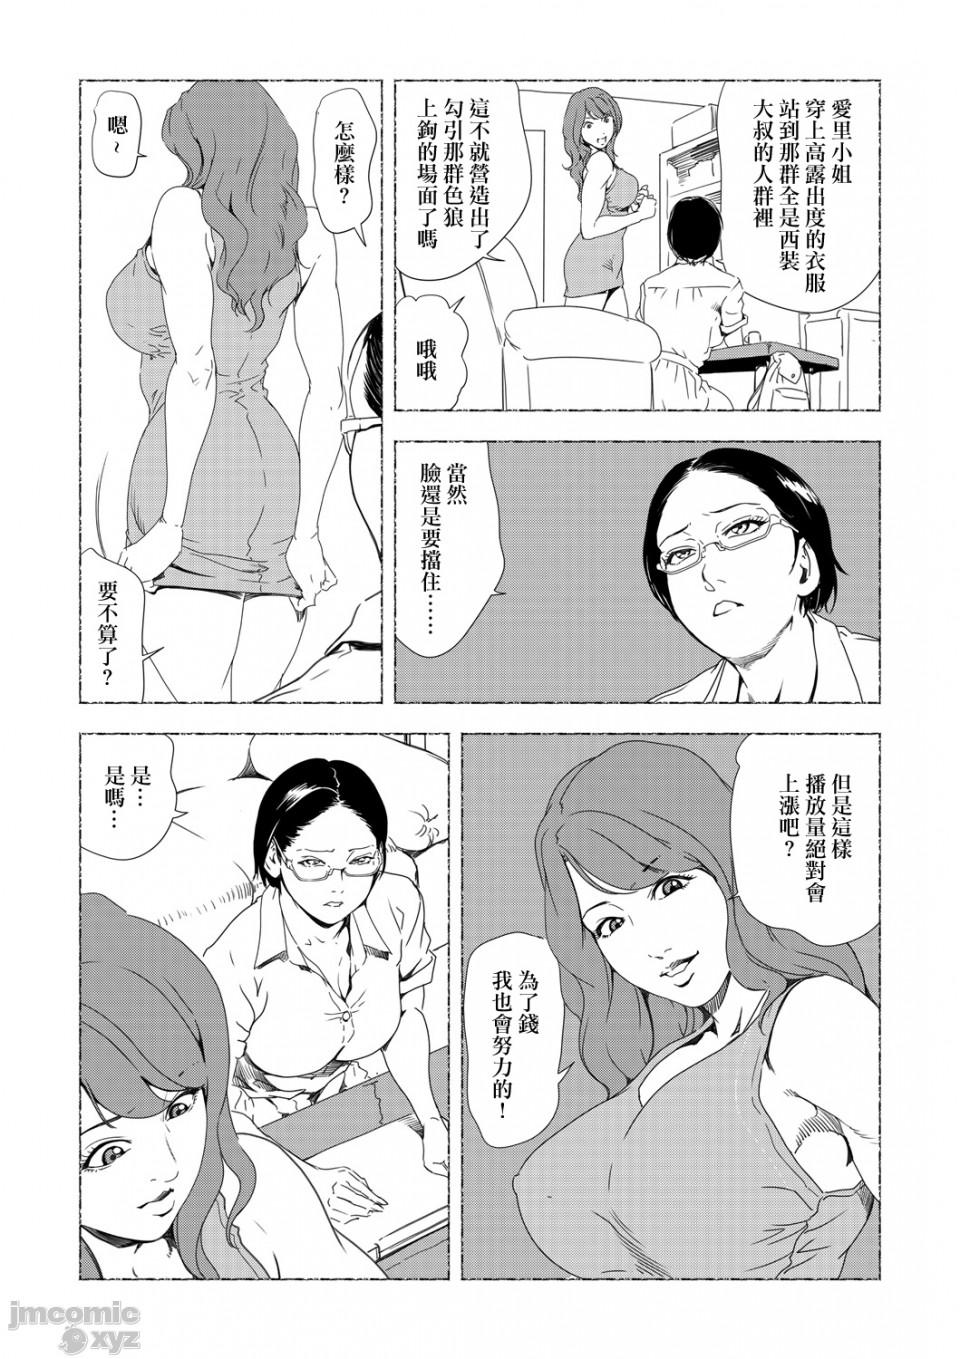 Finger Chikan Express 25 Anus - Page 4